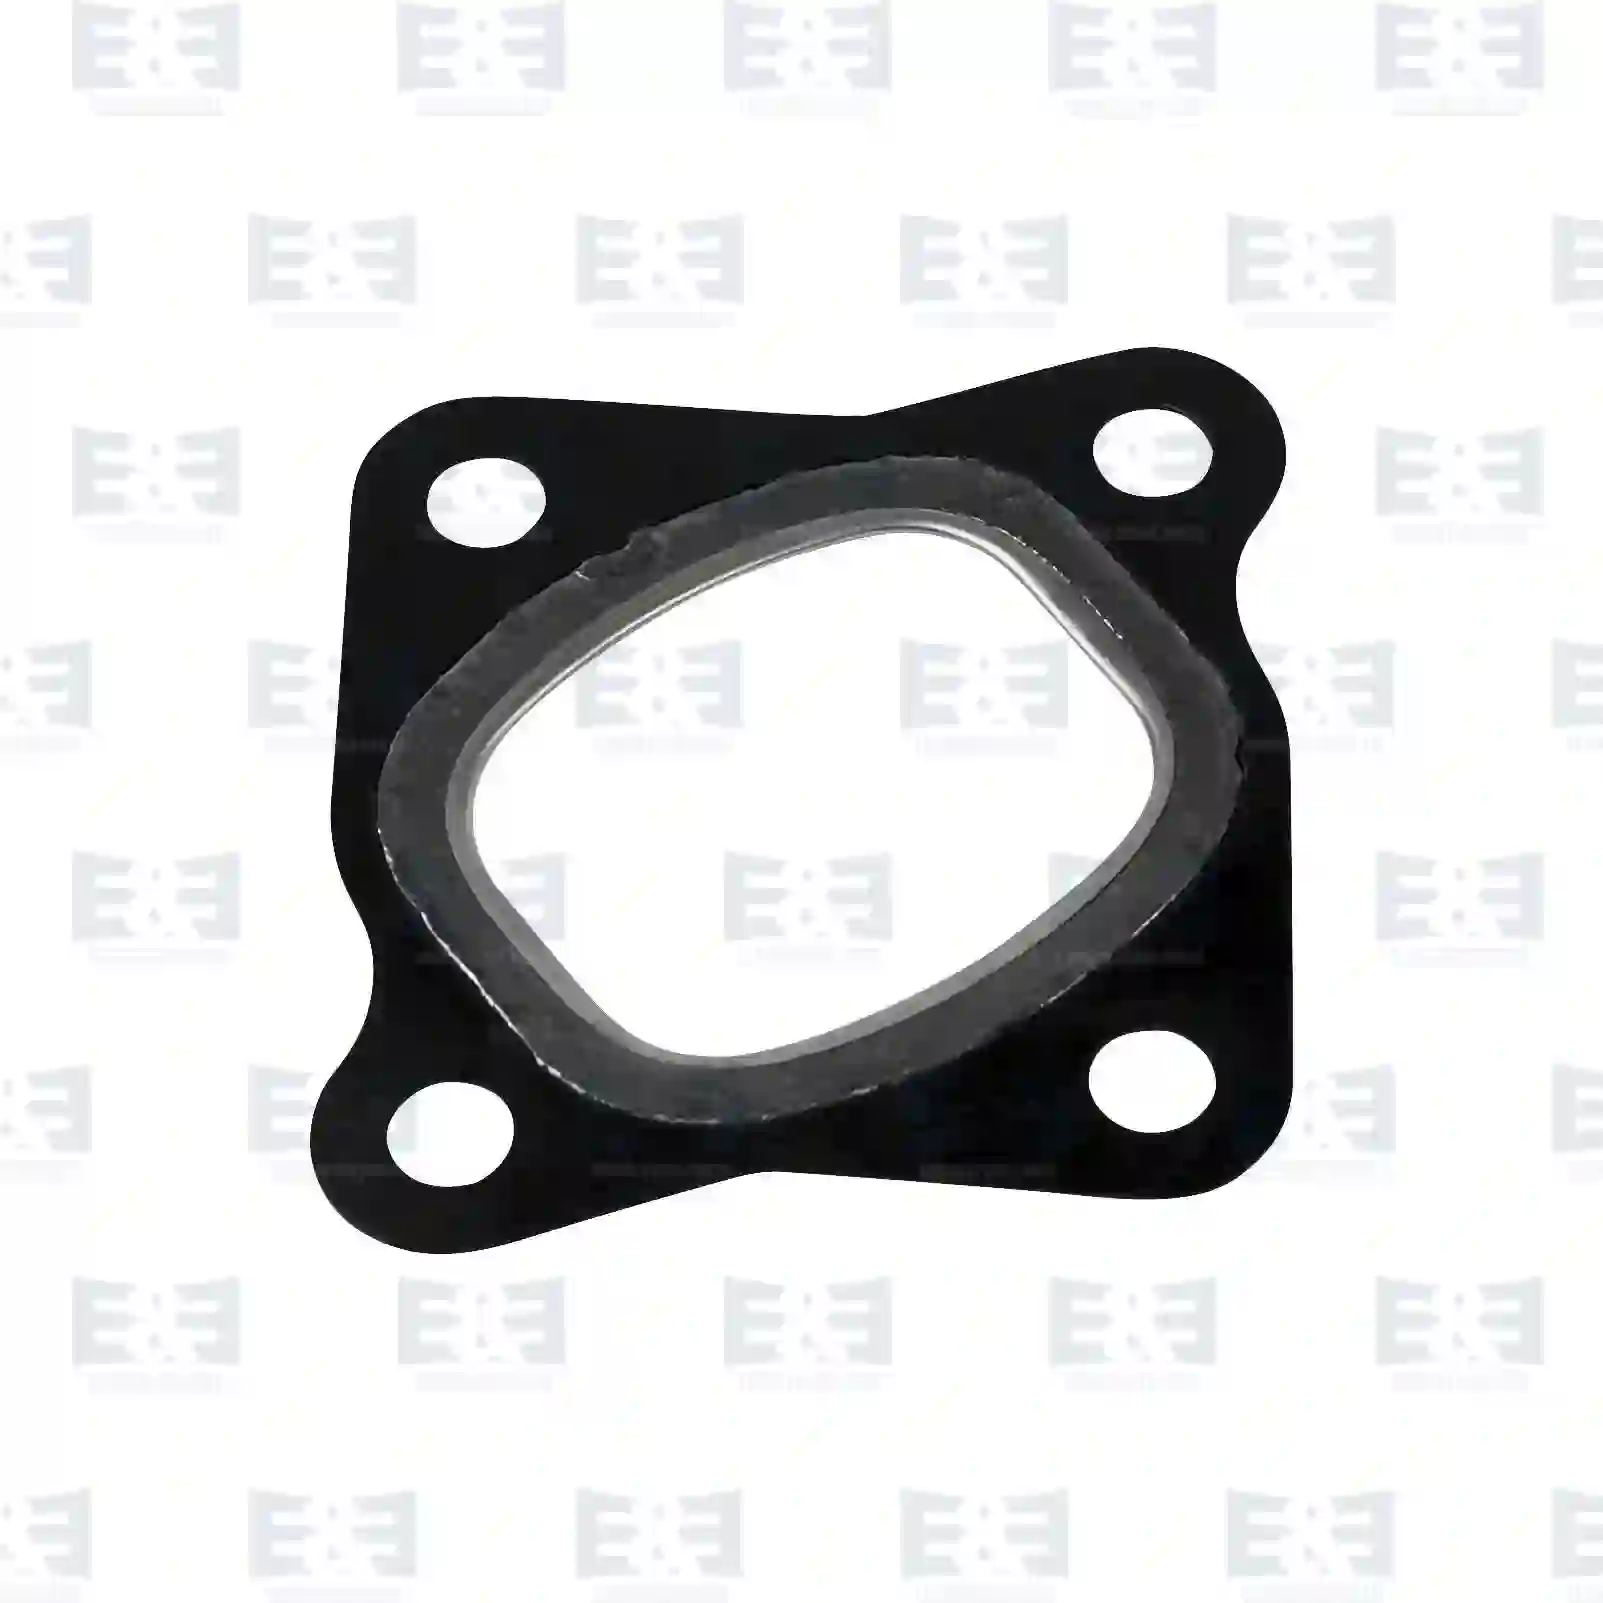  Gasket, exhaust manifold || E&E Truck Spare Parts | Truck Spare Parts, Auotomotive Spare Parts